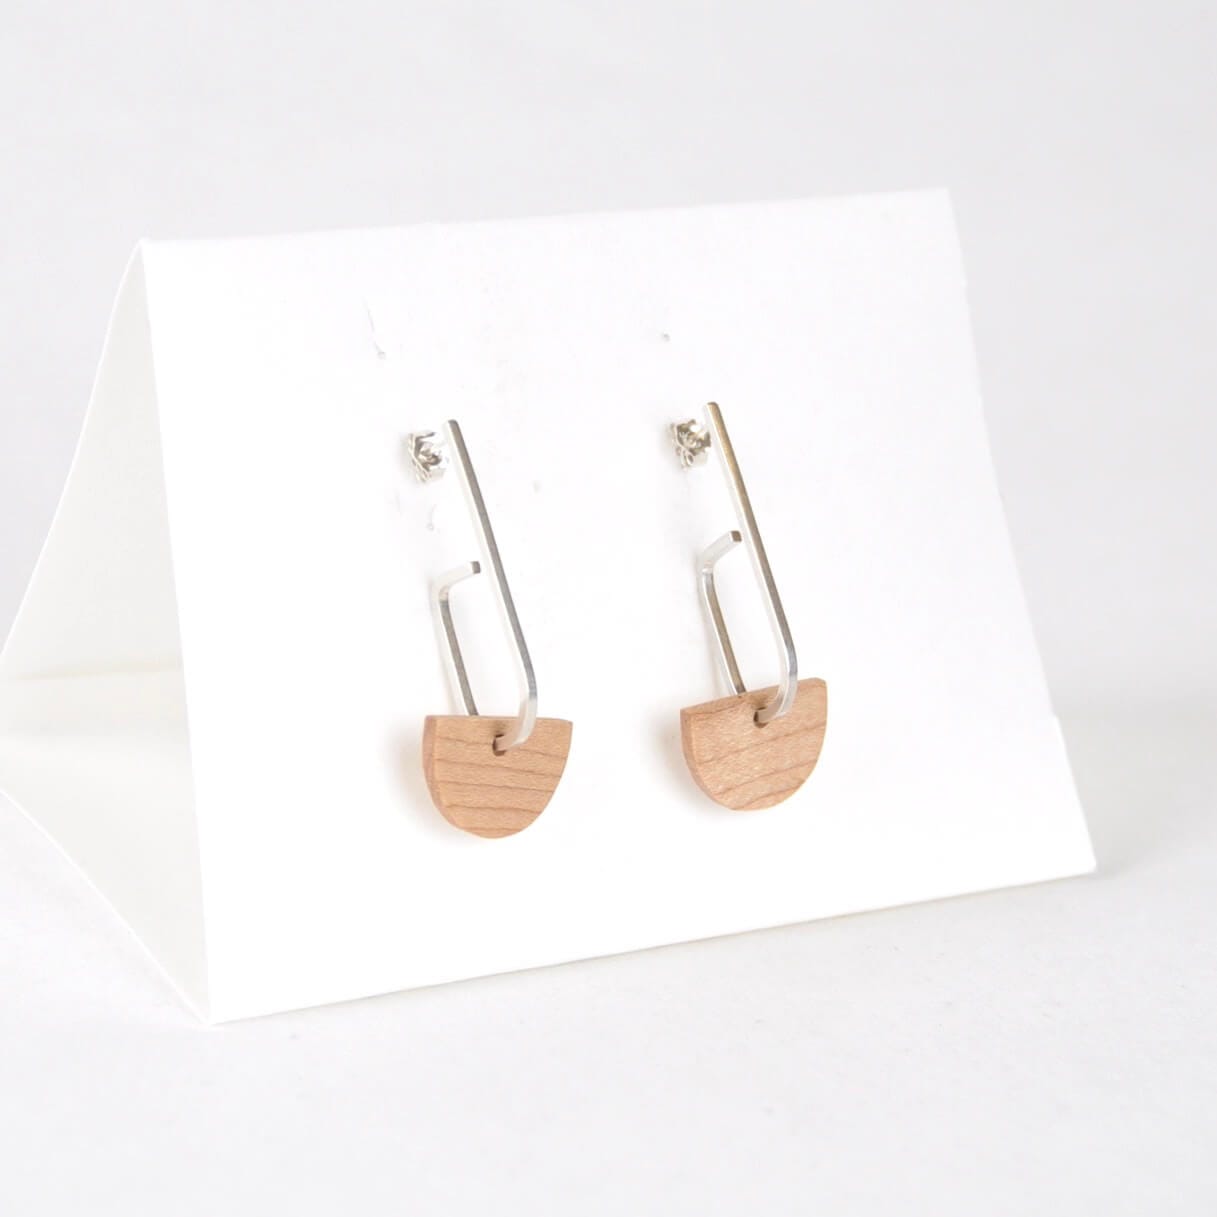 Priormade Woods b - Maple ‘Jay x Wood ’ - Eco Silver and Reclaimed Wooden Earrings (multiple styles)